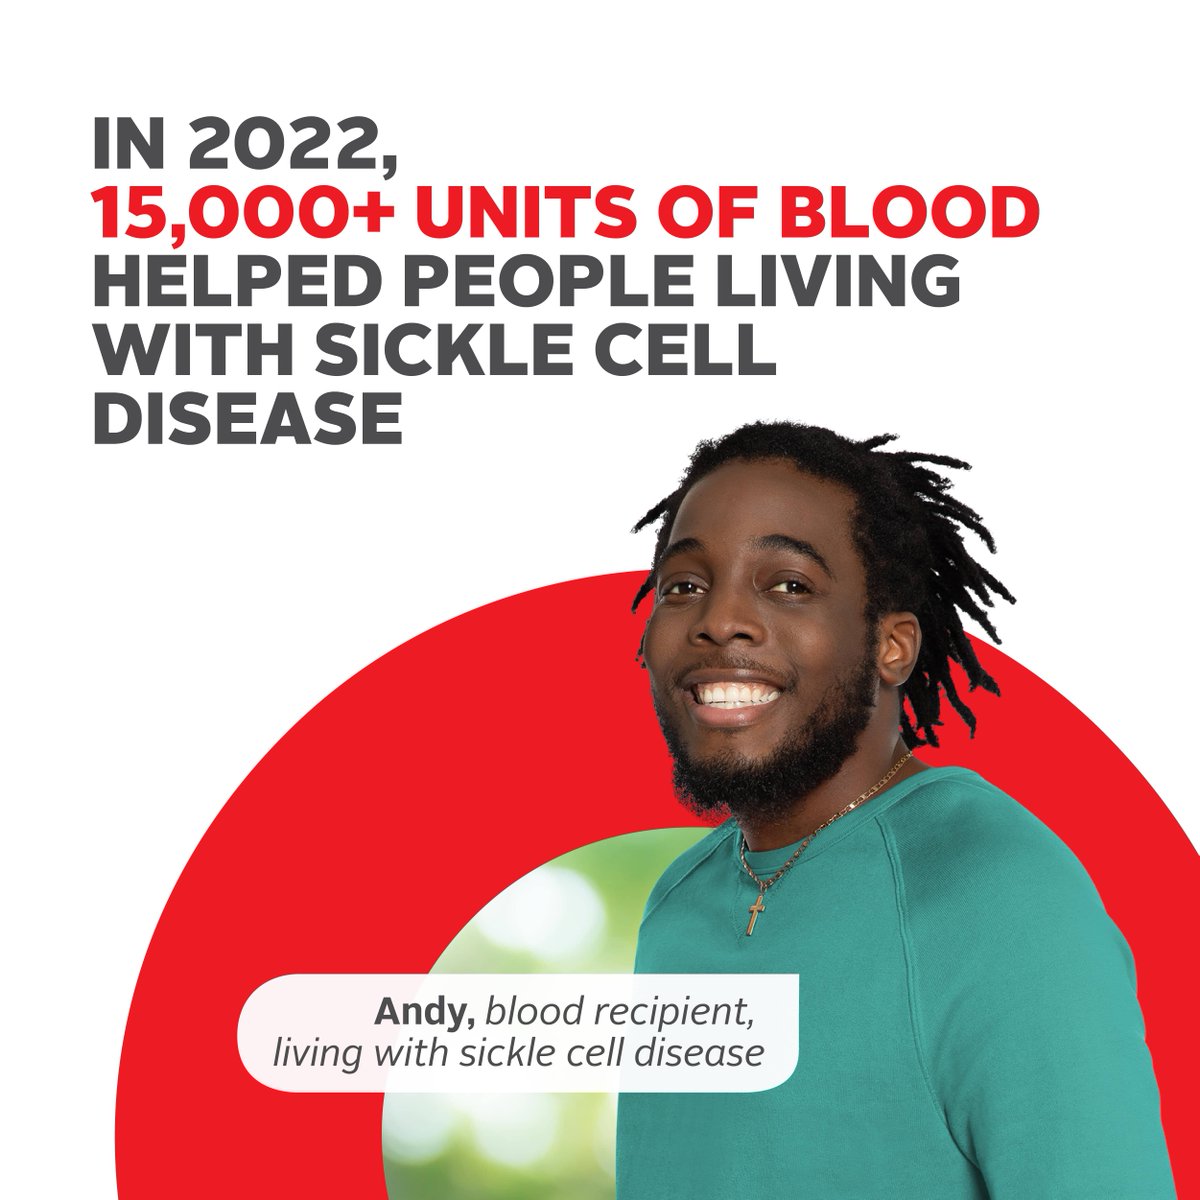 Sickle cell disease is a debilitating condition that affects approximately 6,000 people across Canada. People with sickle cell disease may experience serious complications including severe pain episodes, breathing problems, stroke, and more.

Learn more at ow.ly/JlcR50ORKR2